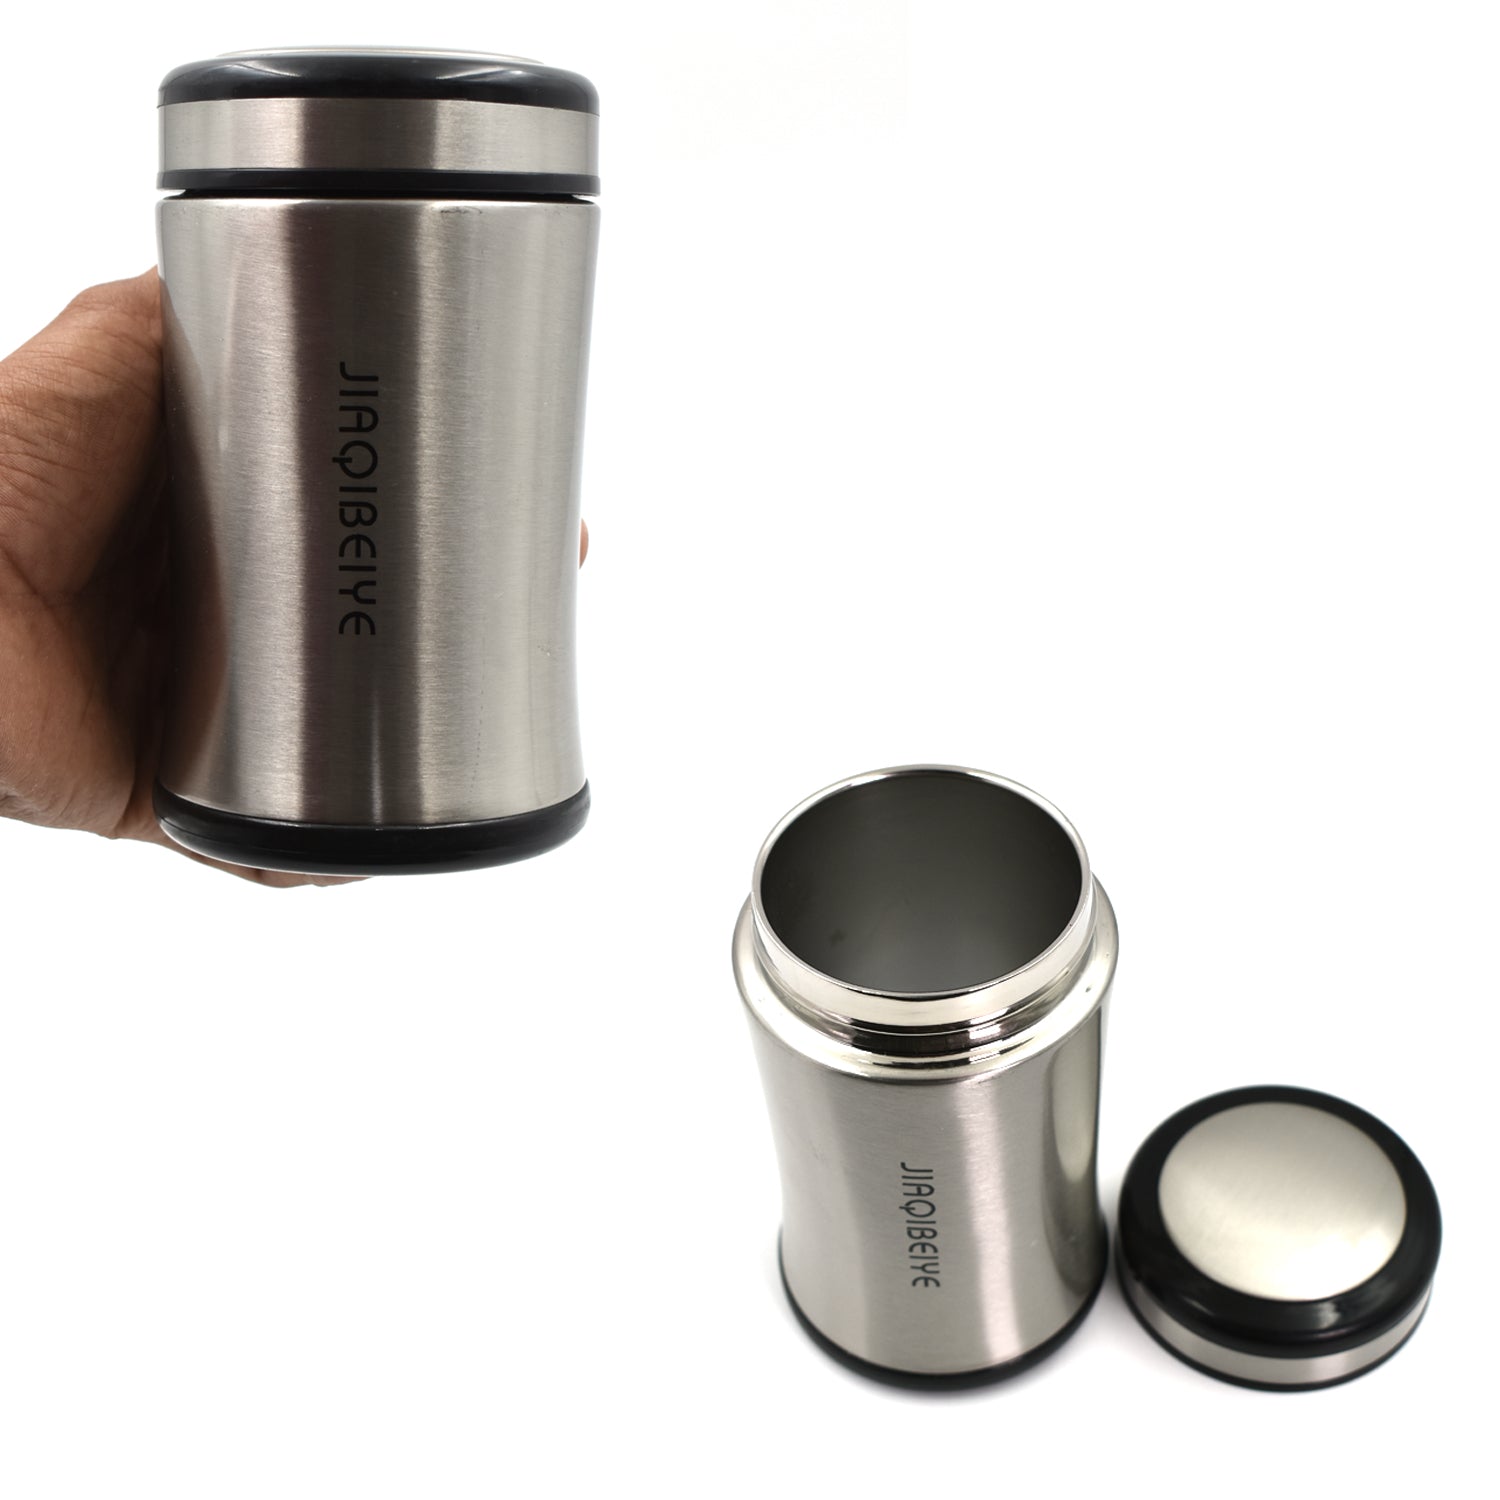 6420 Stainless steel Bottles 300Ml Approx. For Storing Water And Some Other Types Of Beverages Etc. DeoDap